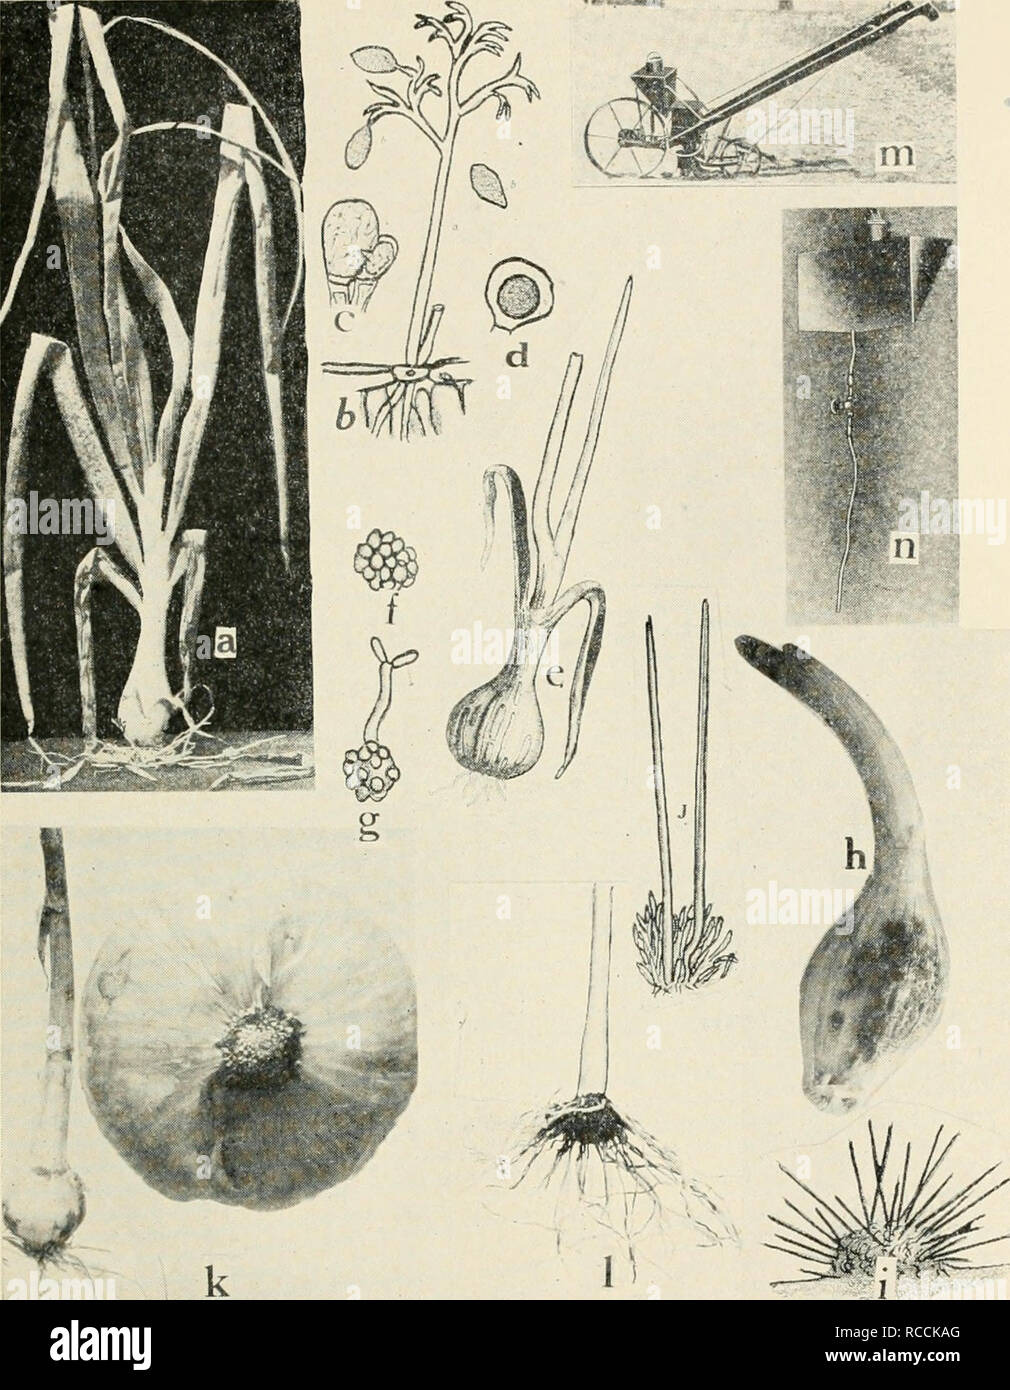 . Diseases of truck crops and their control. Plants -- Diseases. Fig. 54. Onion Diseases. a. Downy mildew, 6. mature conidiophore and conidia of Peronospora schleideni, c. fertilization of the female oogonium by the male antheridium, d. oospore (a. to d. after Wh2tzel), e. onion smut, /. spore ball of the smut fungus, g. spore germina- tion, formation of sporidia at x, h. Vermicularia anthracnose, i. section through acervulis of Vermicularia circinans, j. setas and spore formation in 1-'. circinans {e. to g., i. and i. after Thaxter), k. pink root of onion, healthy and diseased bulbs, /. pink  Stock Photo